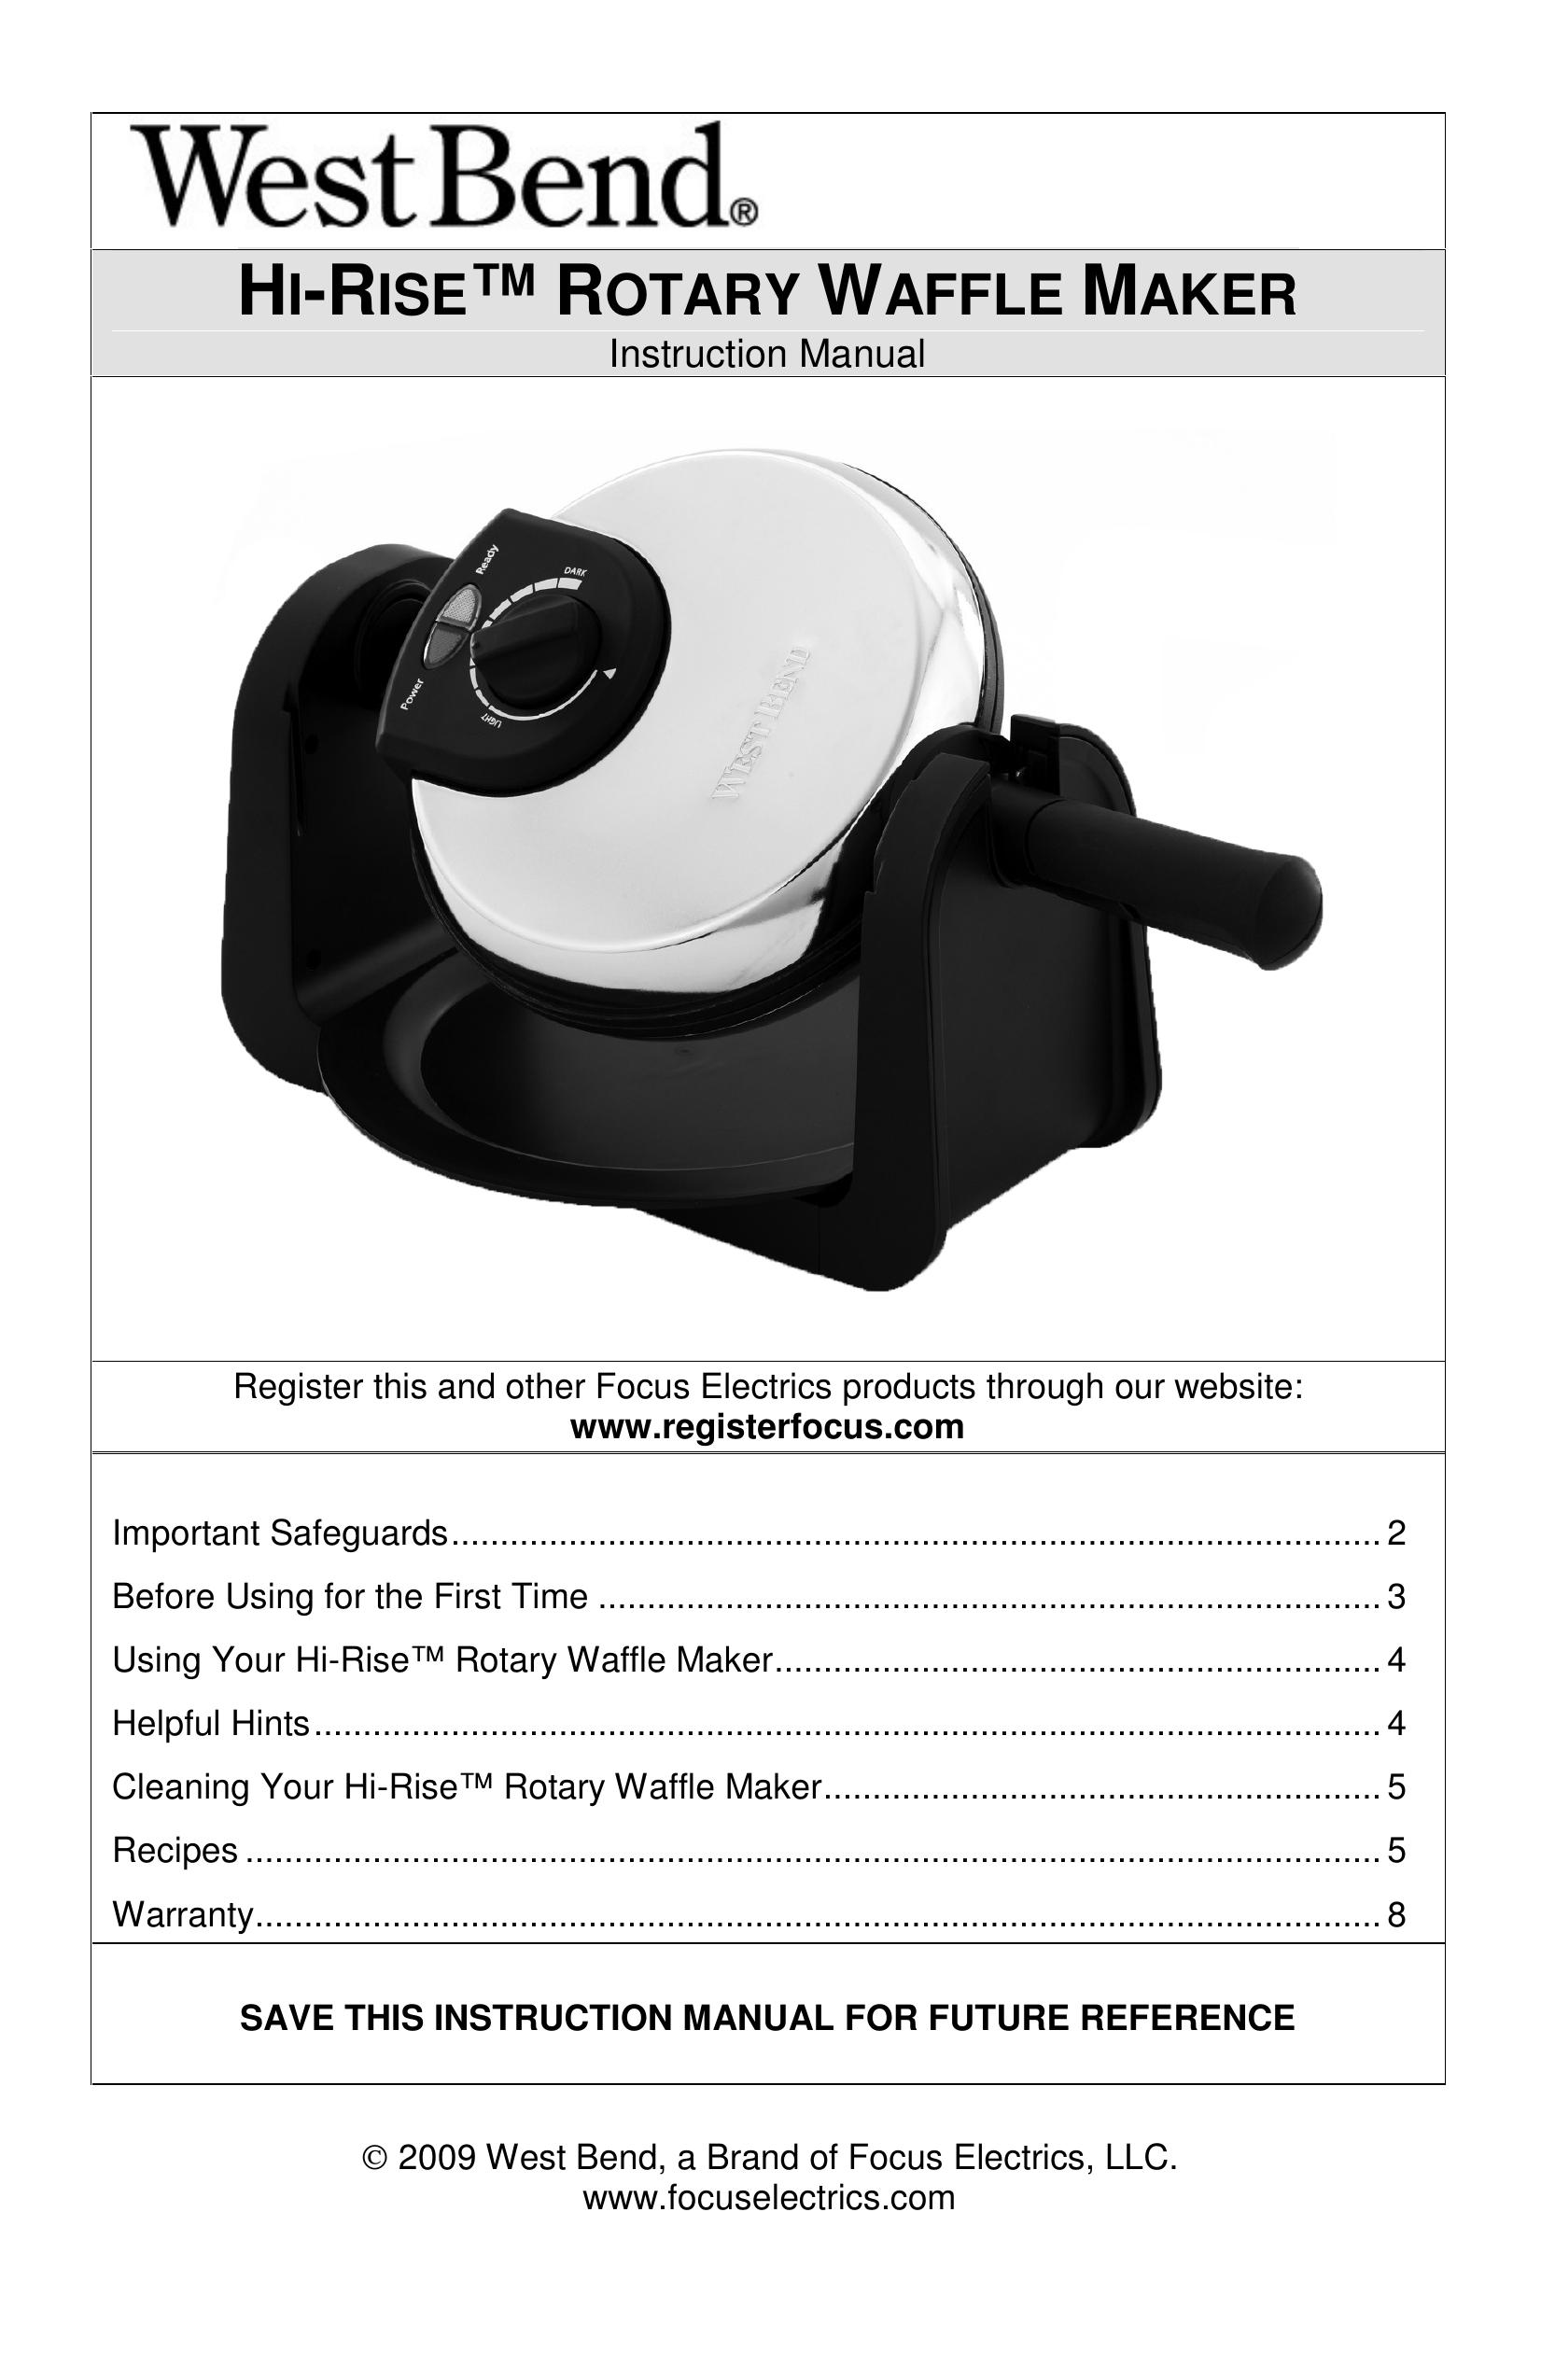 West Bend L5790A Waffle Iron User Manual